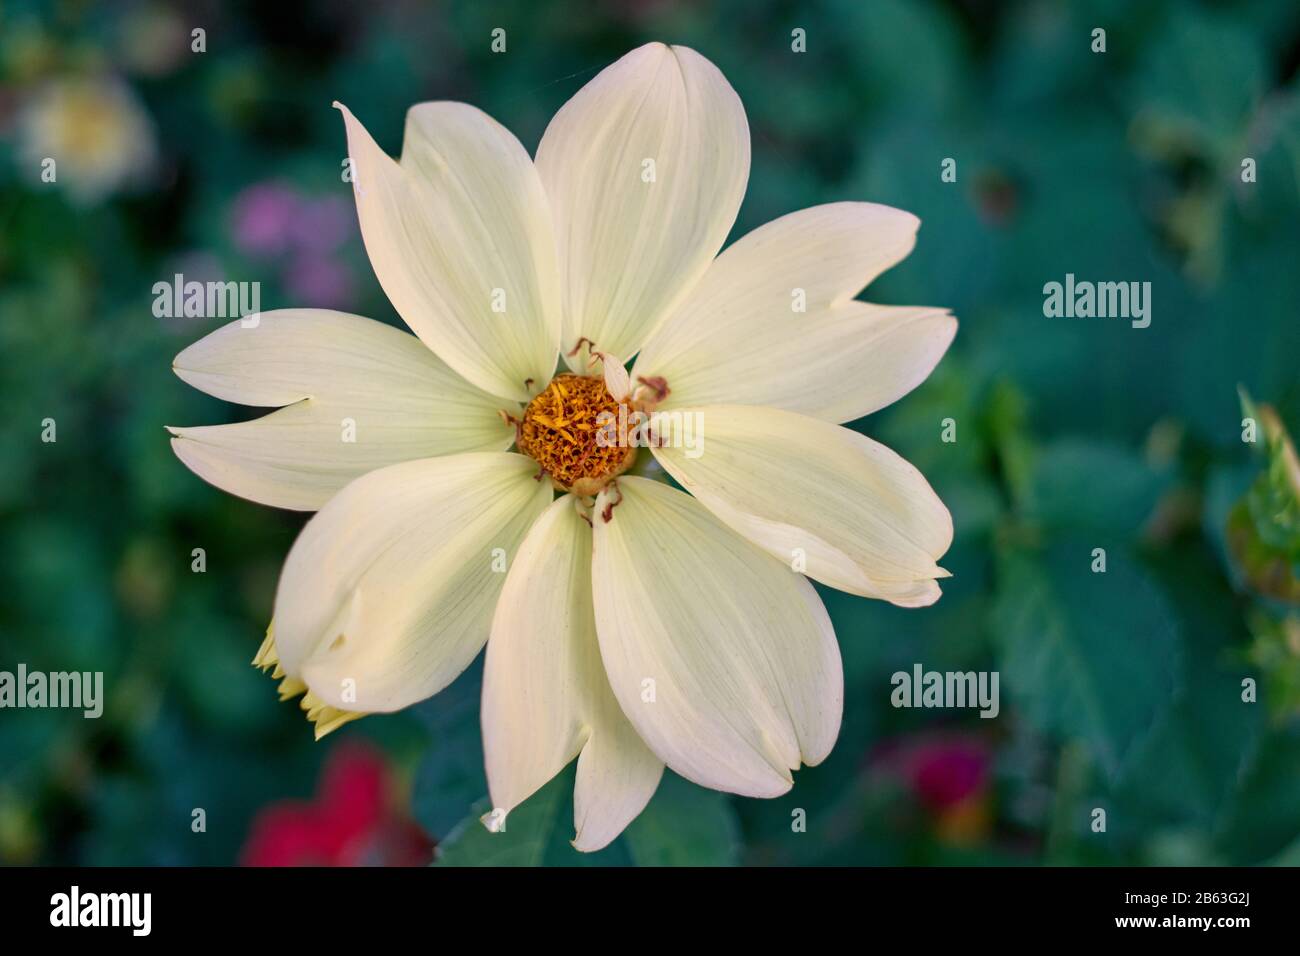 Flower with white petals and yellow middle. Stock Photo